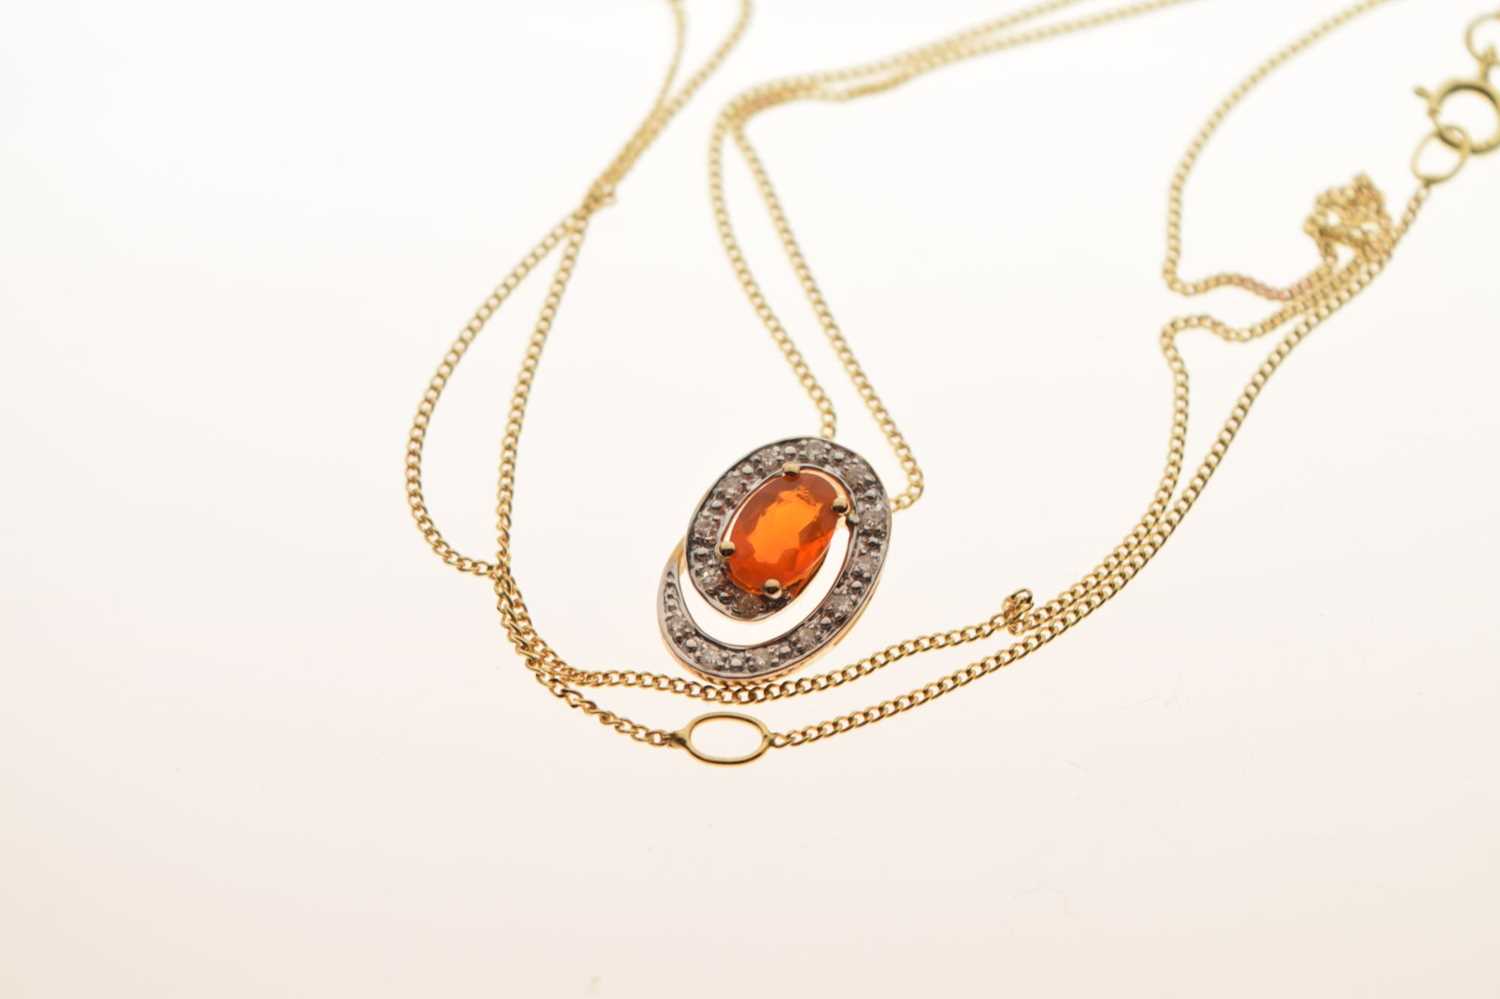 9ct gold fire opal pendant and earring set - Image 8 of 11